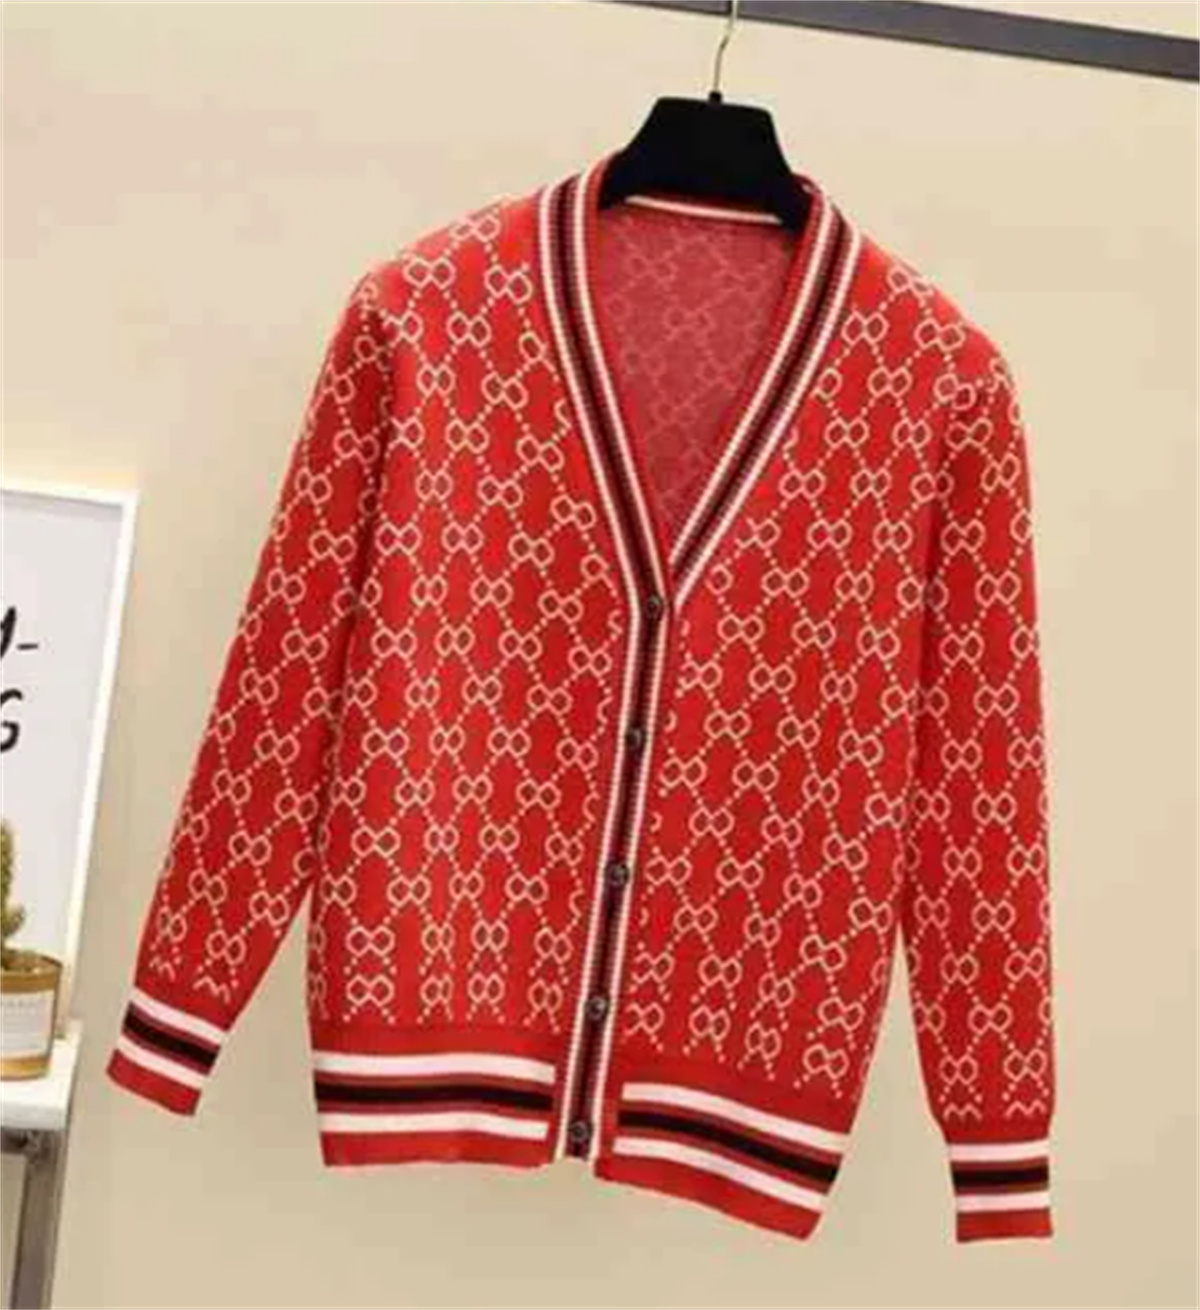 Designer Ladies Knitted Jackets Cardigans Sweater Coats Women Long Sleeve Causal Office FashionTops Autumn Winter Knitting Sweaters Size S-2XL